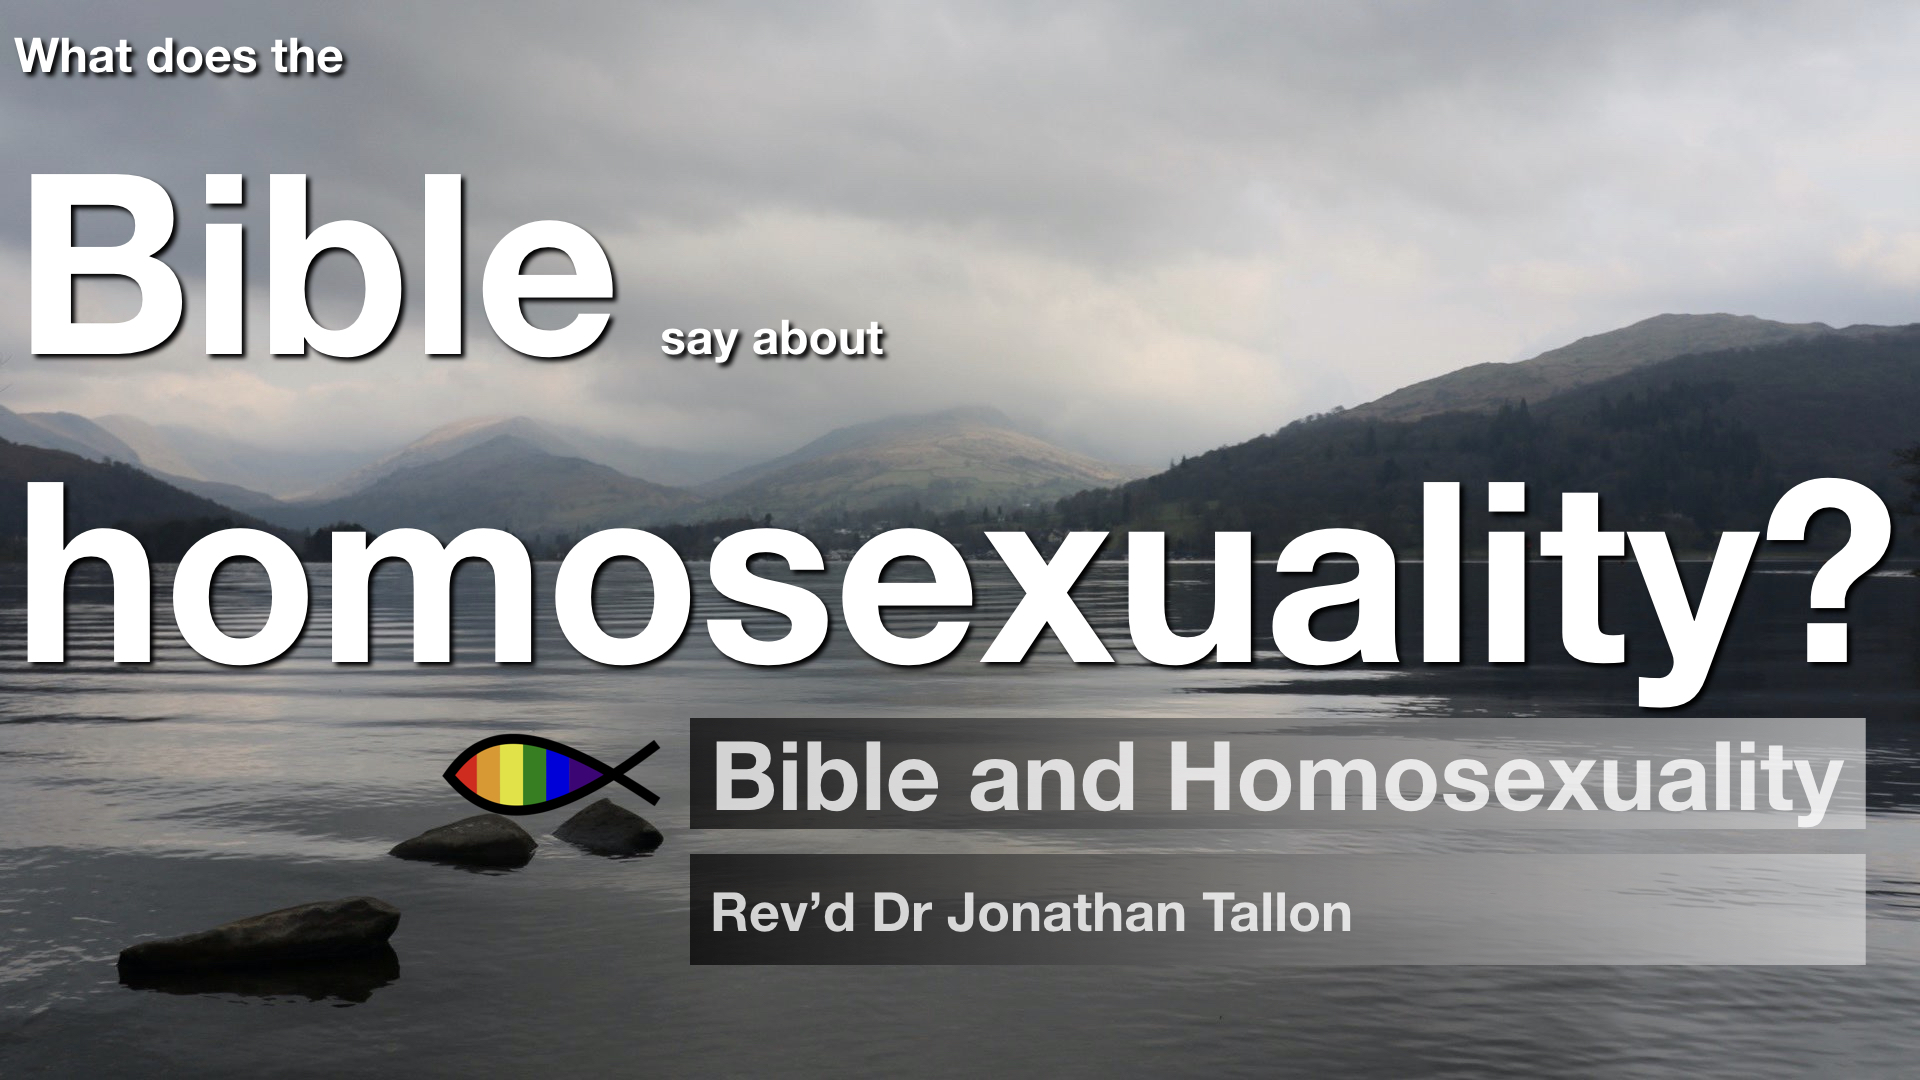 What does the Bible say about homosexuality?